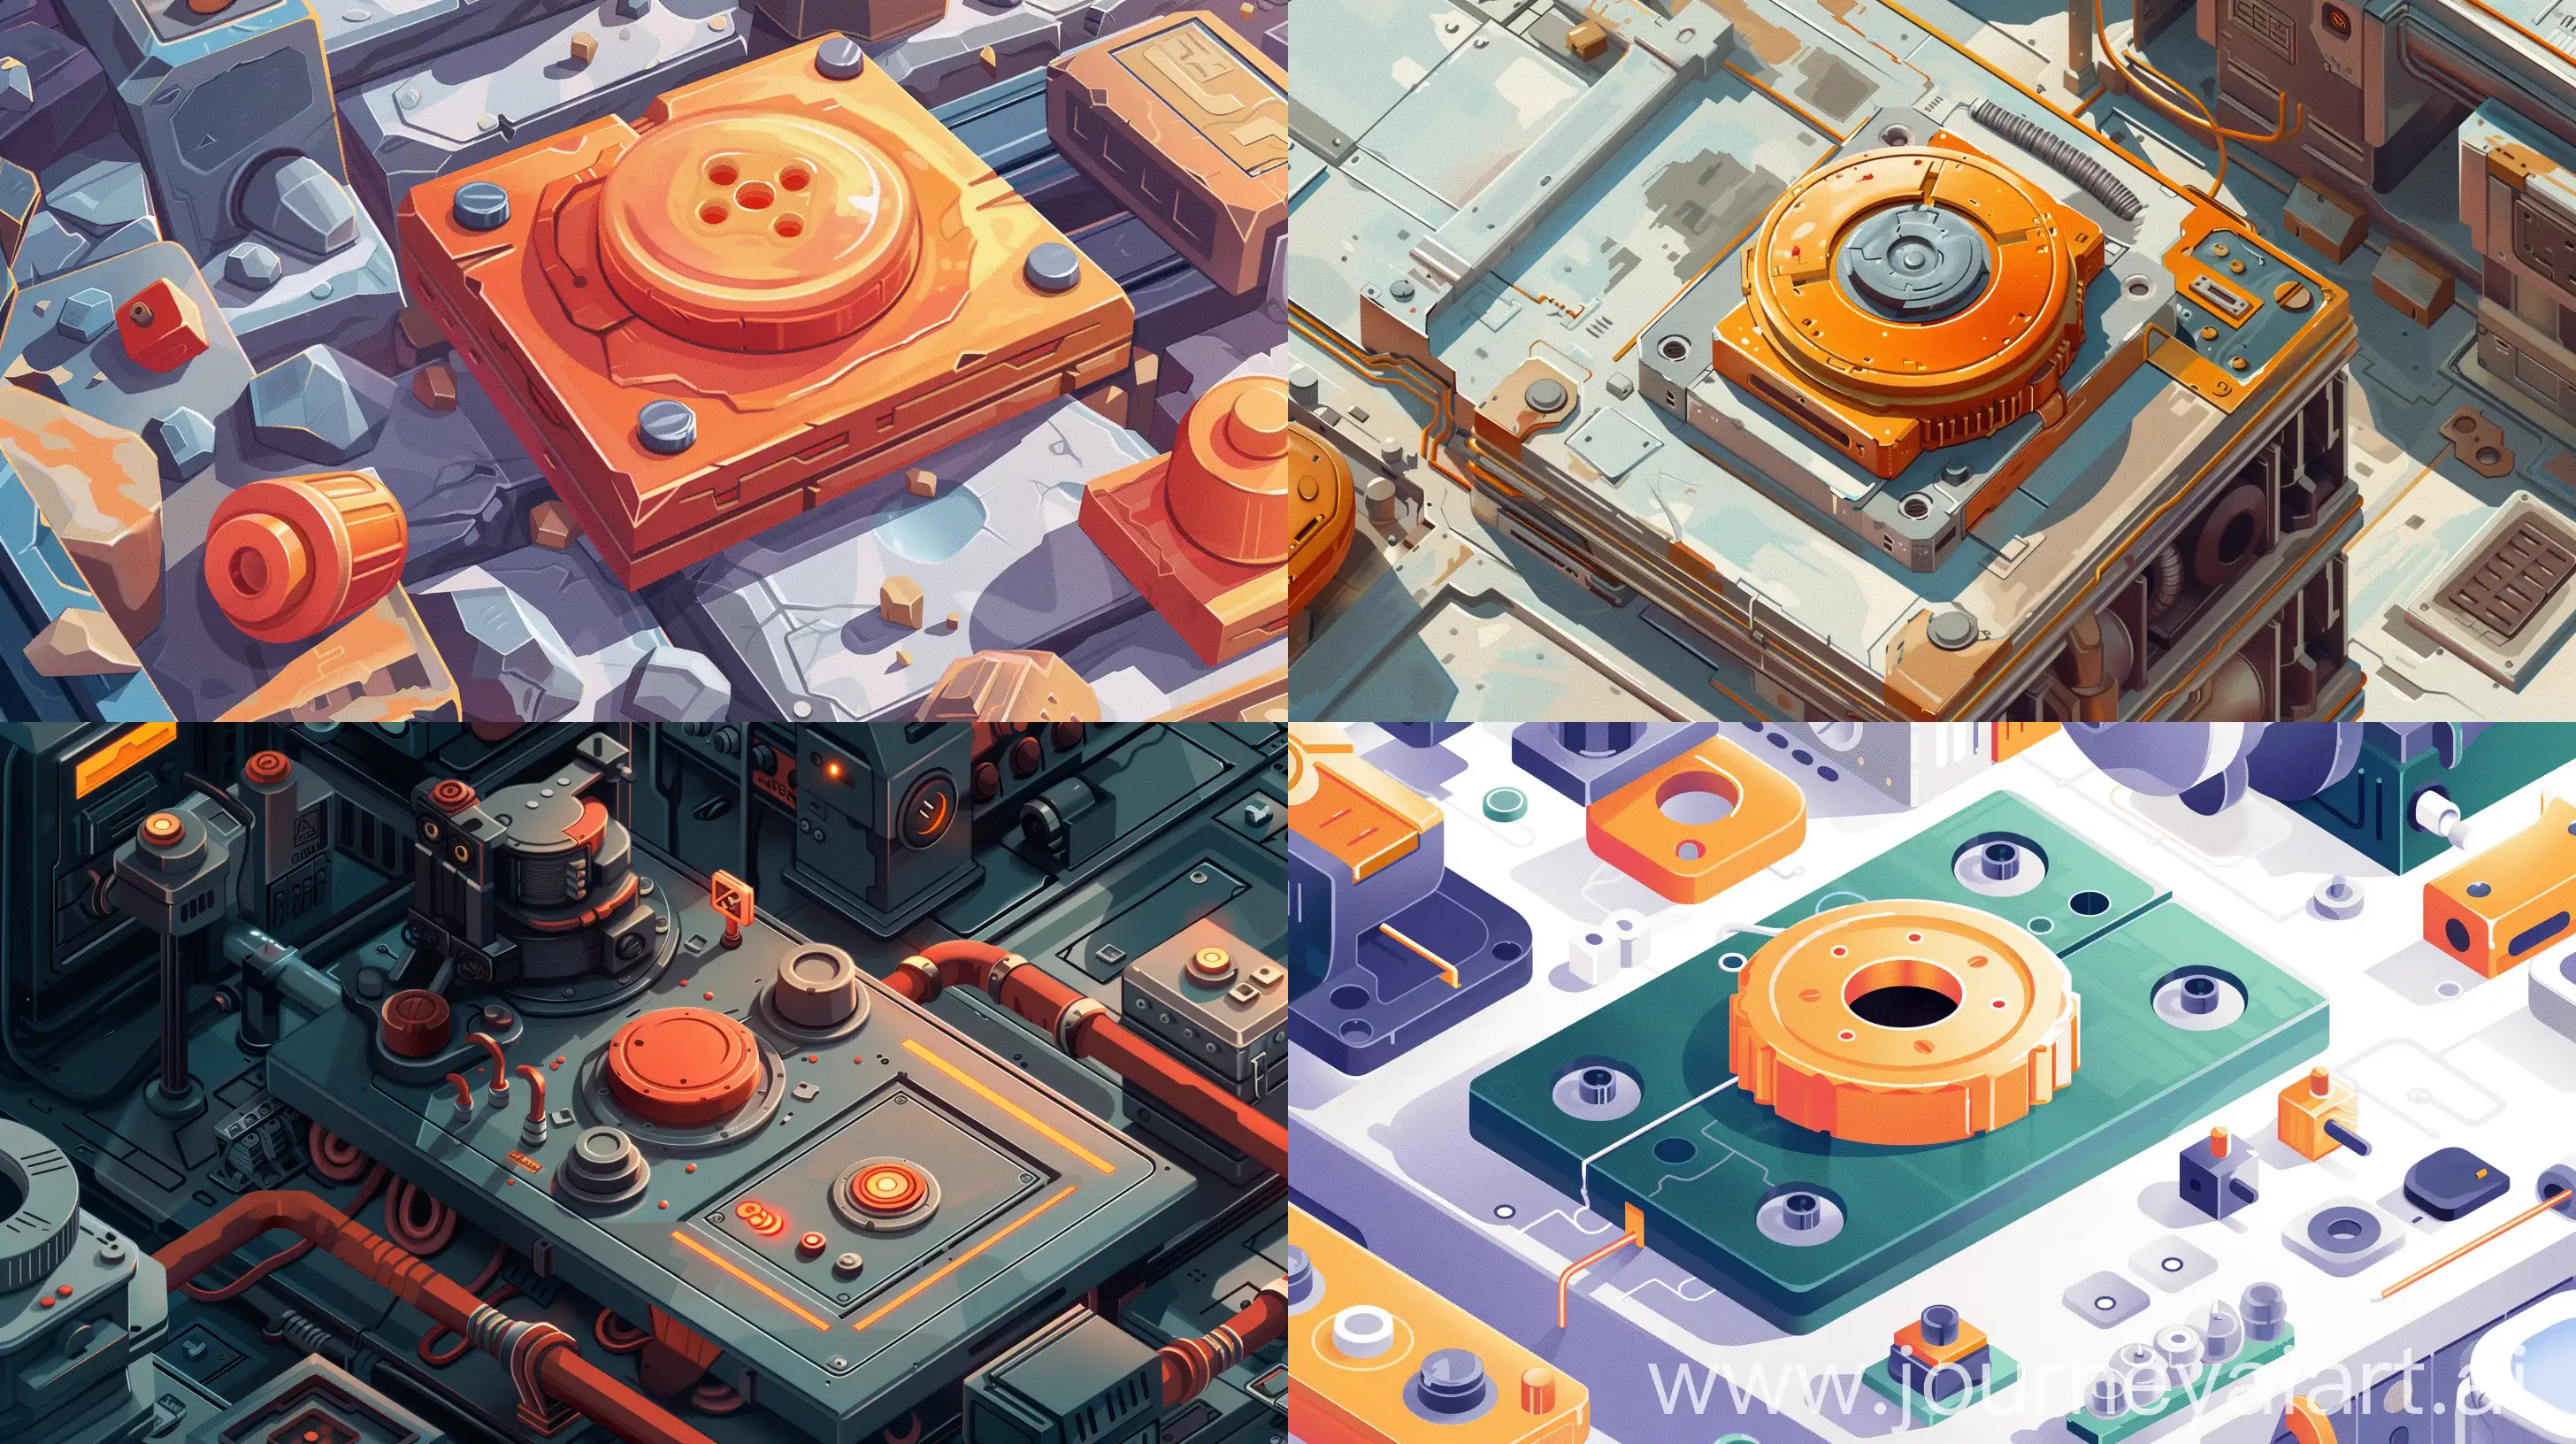 An illustration depicting the process of creating a button in a popular sandbox game. The image showcases the fundamental components of the button within the game's environment. It illustrates the intricate mechanism behind the button's functionality, emphasizing its interaction with the surrounding elements. The illustration provides a clear visual guide on how the button operates and its integration with the game's mechanics. --ar 16:9 